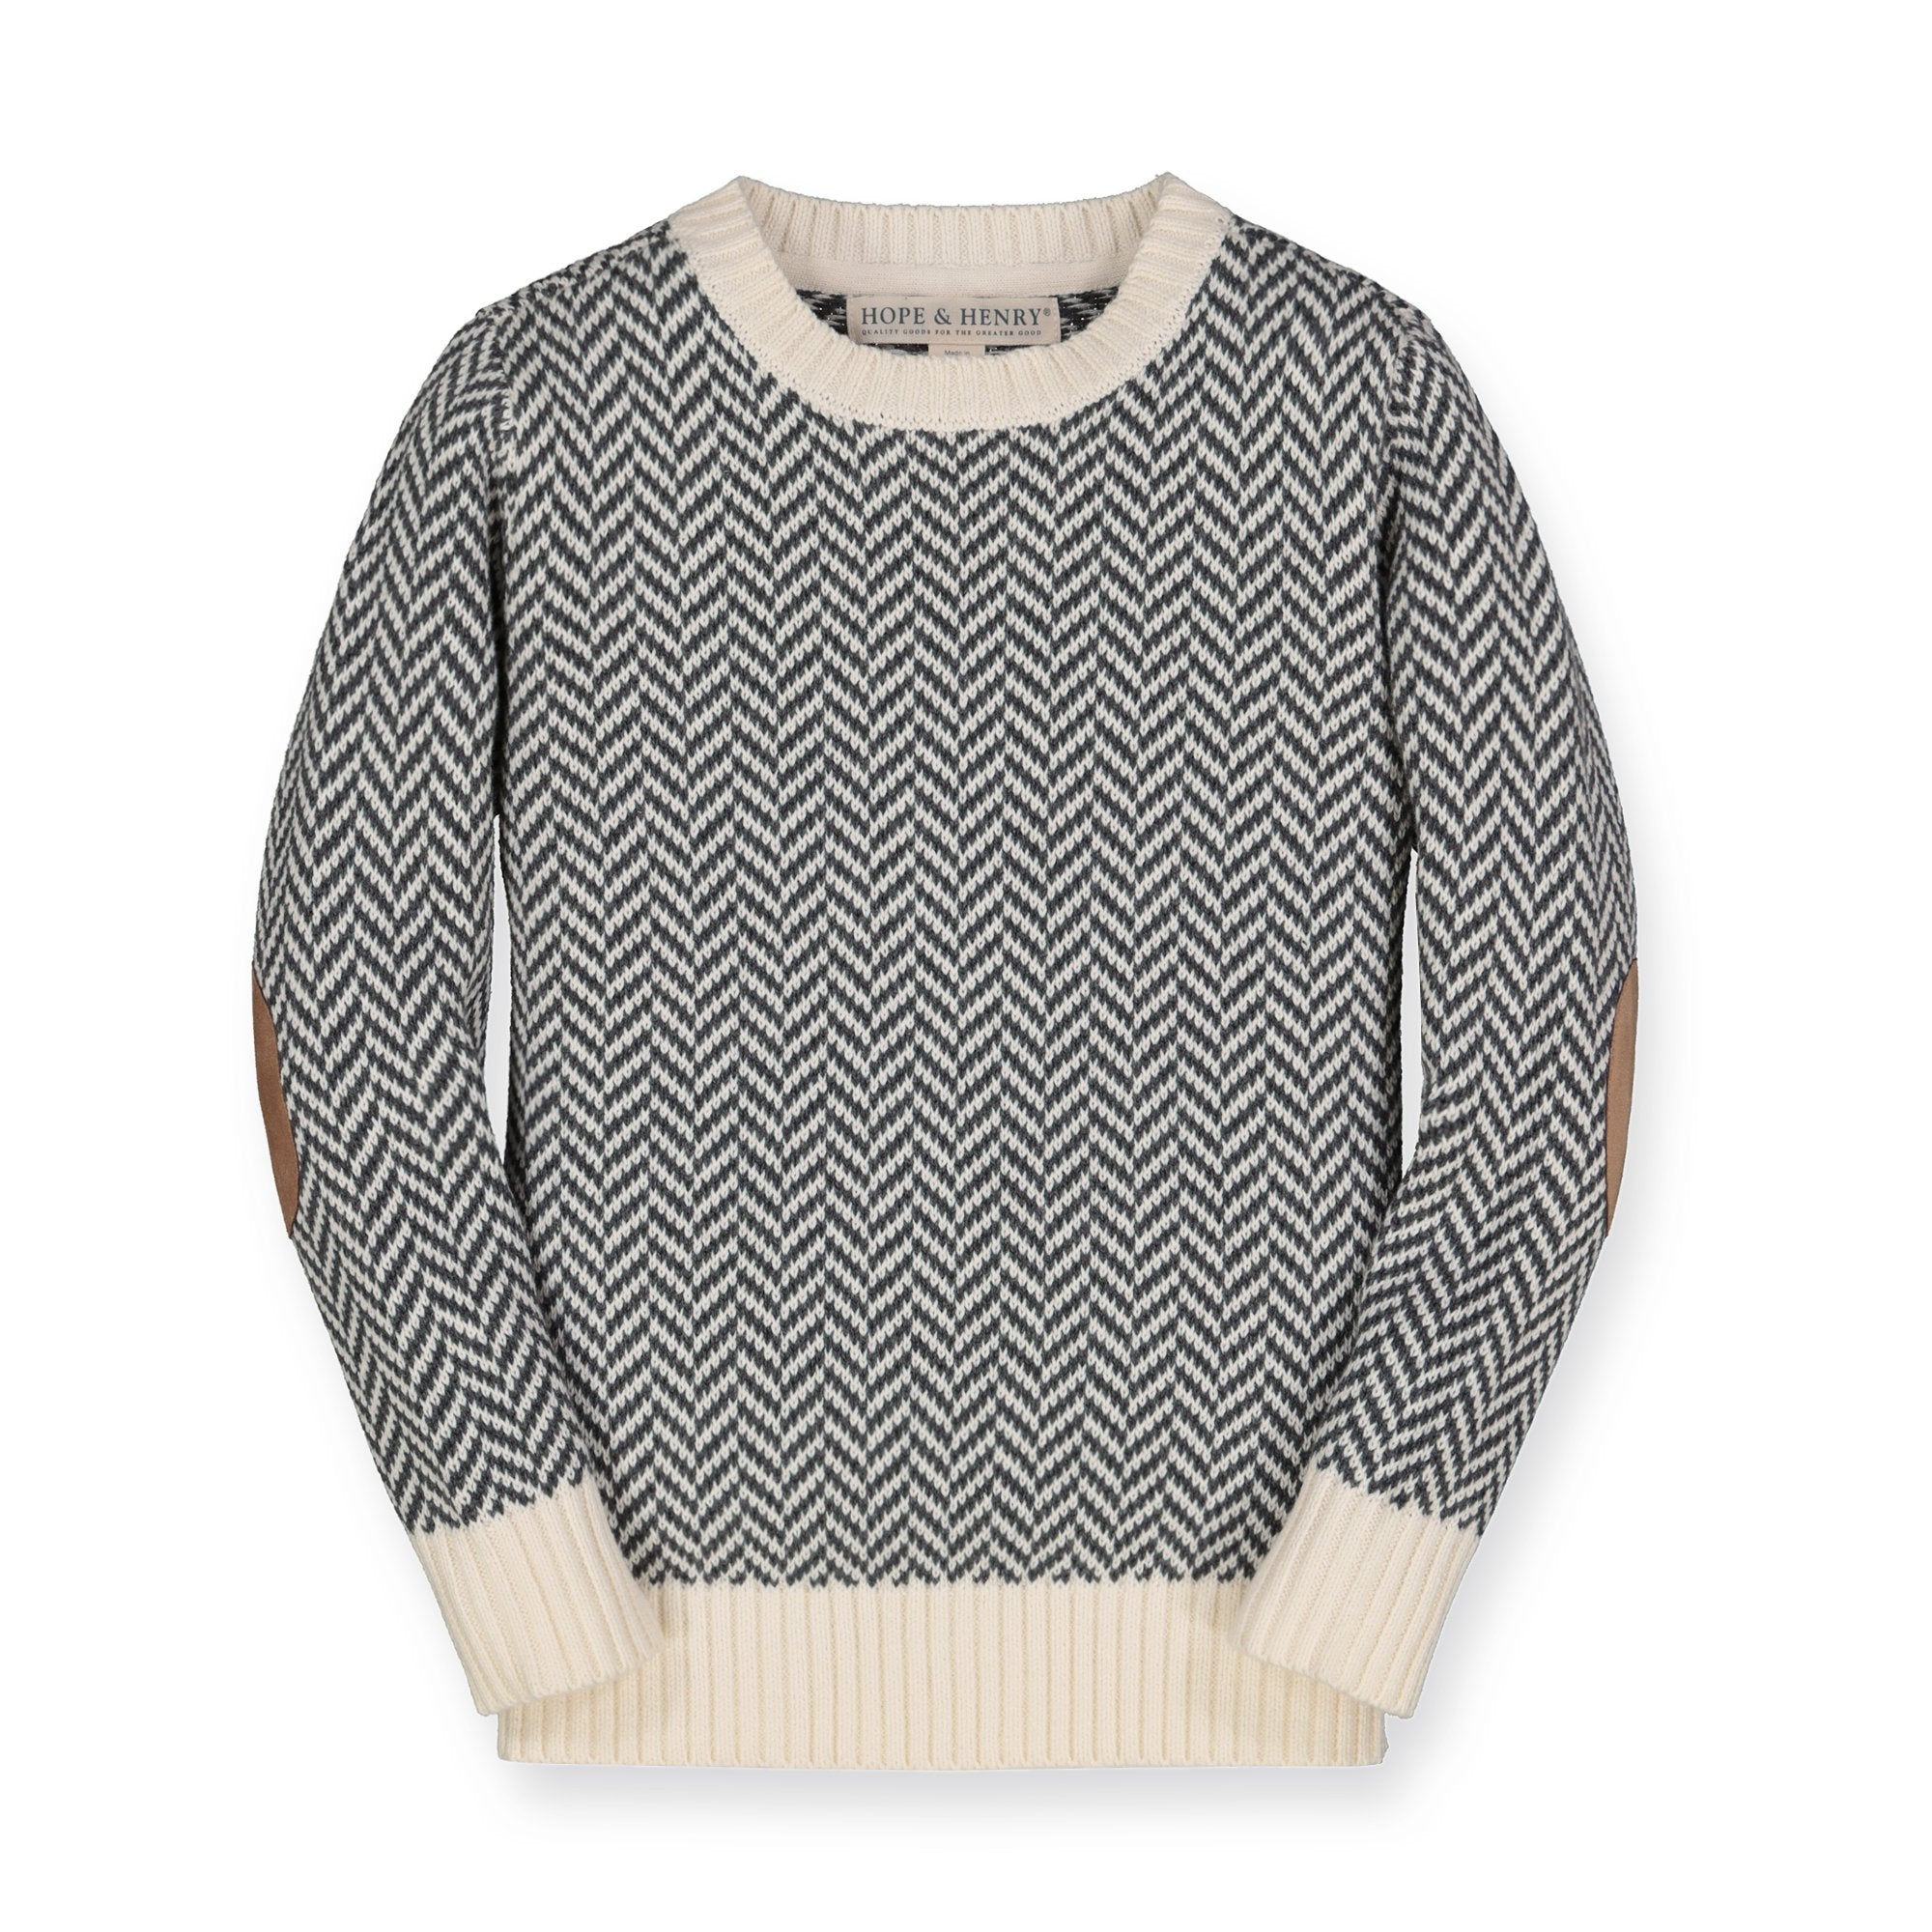 Factory: Boys' Striped Elbow-patch Crewneck Sweater For Boys